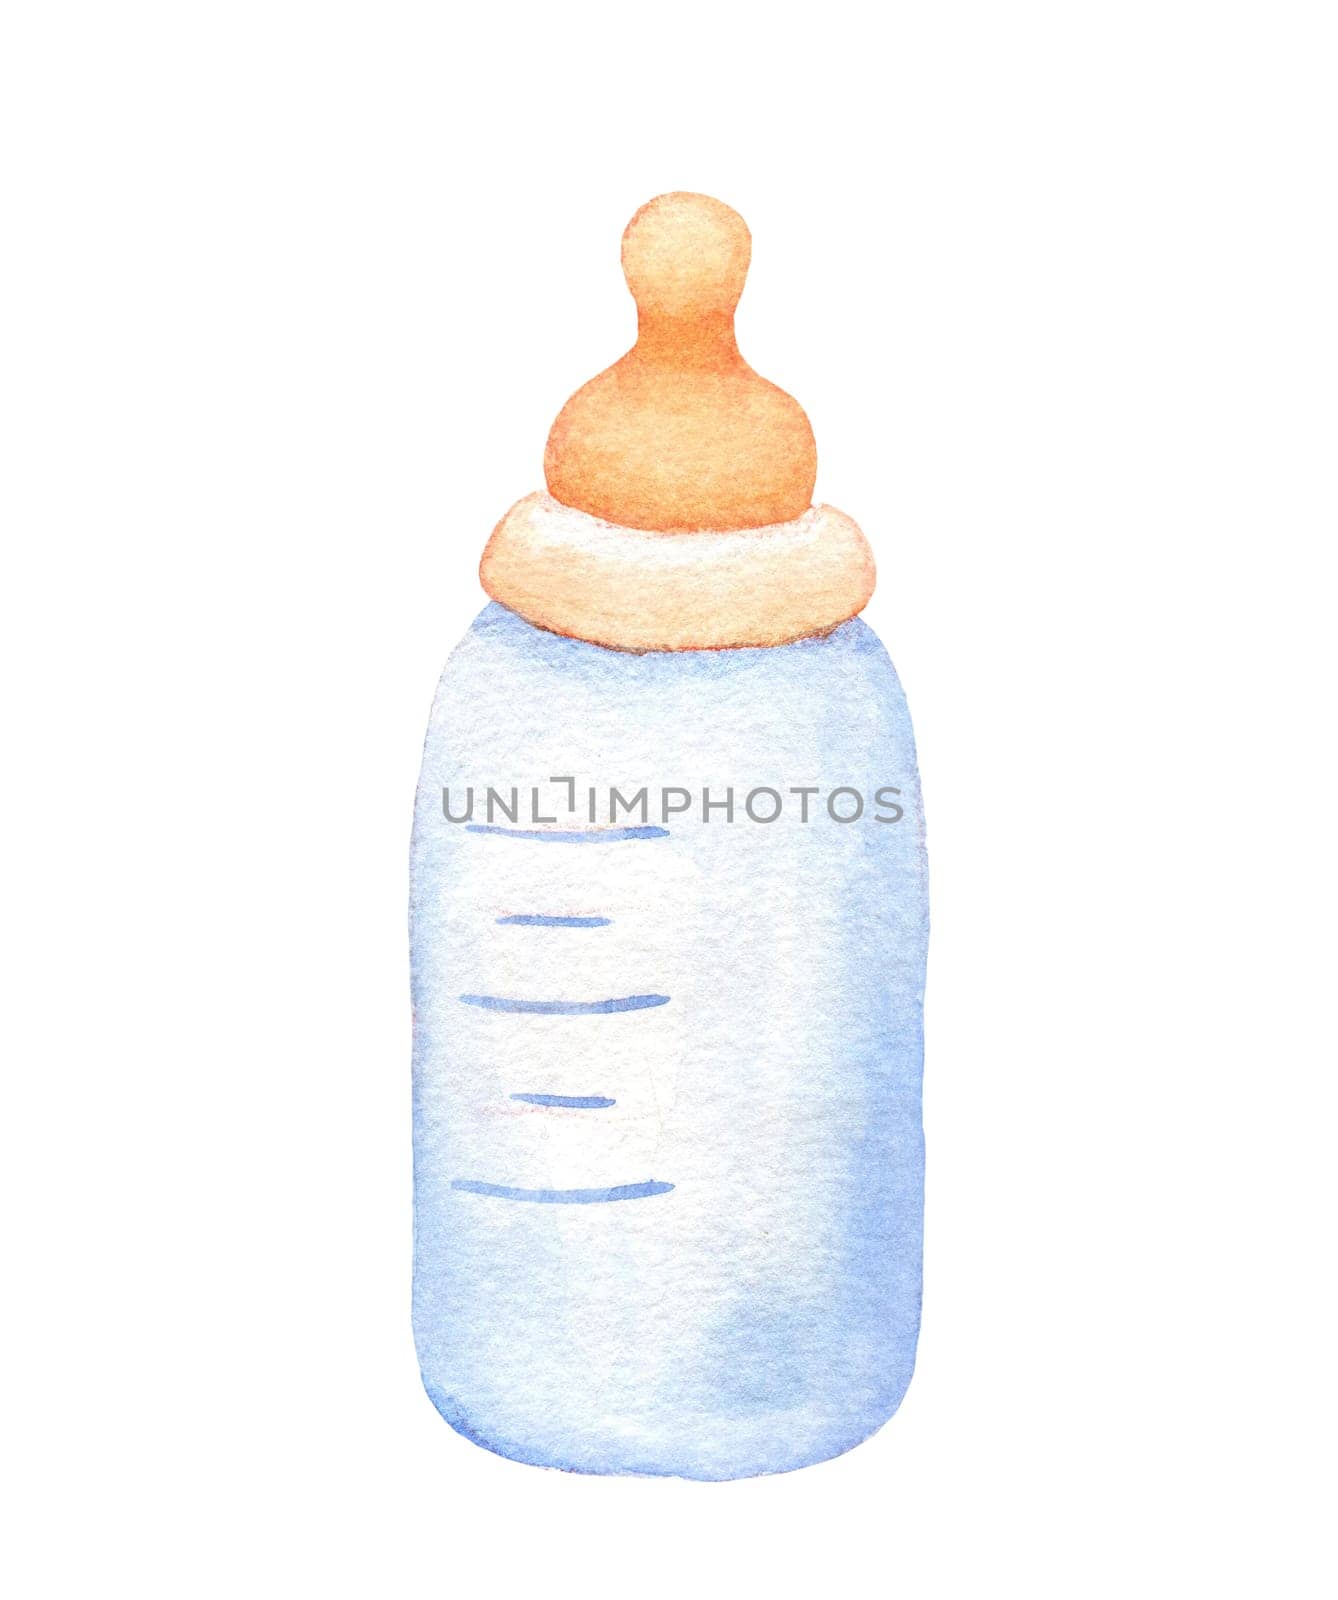 Watercolor baby milk bottle illustration isolated on white. Hand painted sketch by ElenaPlatova